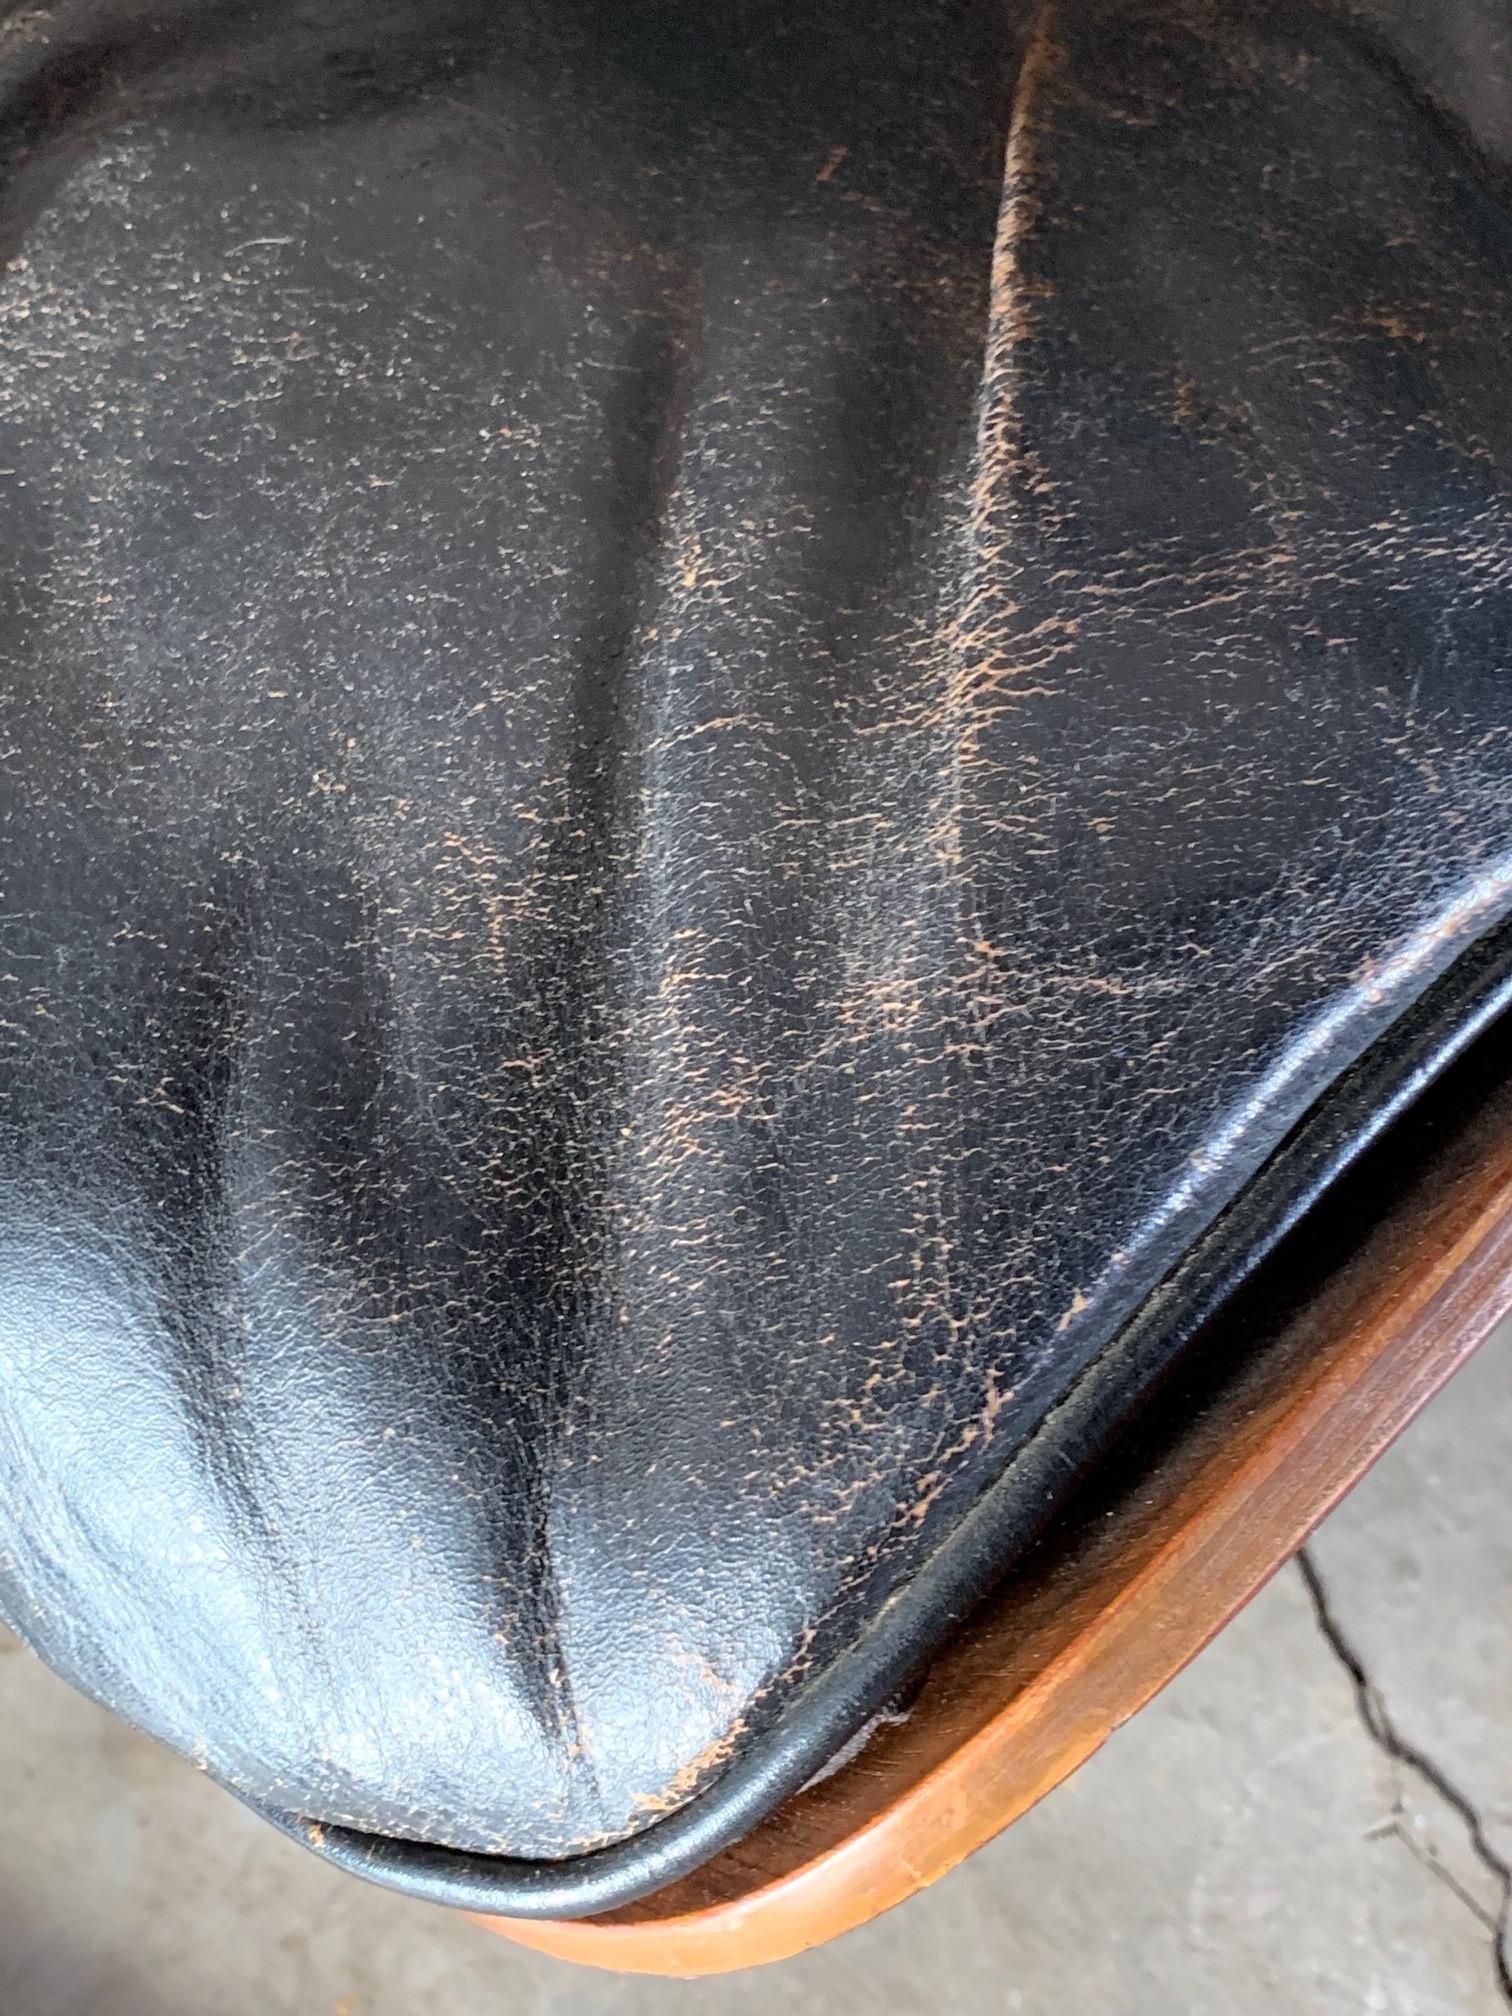 A Classic first year of production-1956 Charles Eames for Herman Miller lounge chair and ottoman, known as 670 and 671. Black leather and rosewood, with rare foil label. Three screw configuration and slip on boot glides. This a rare example with